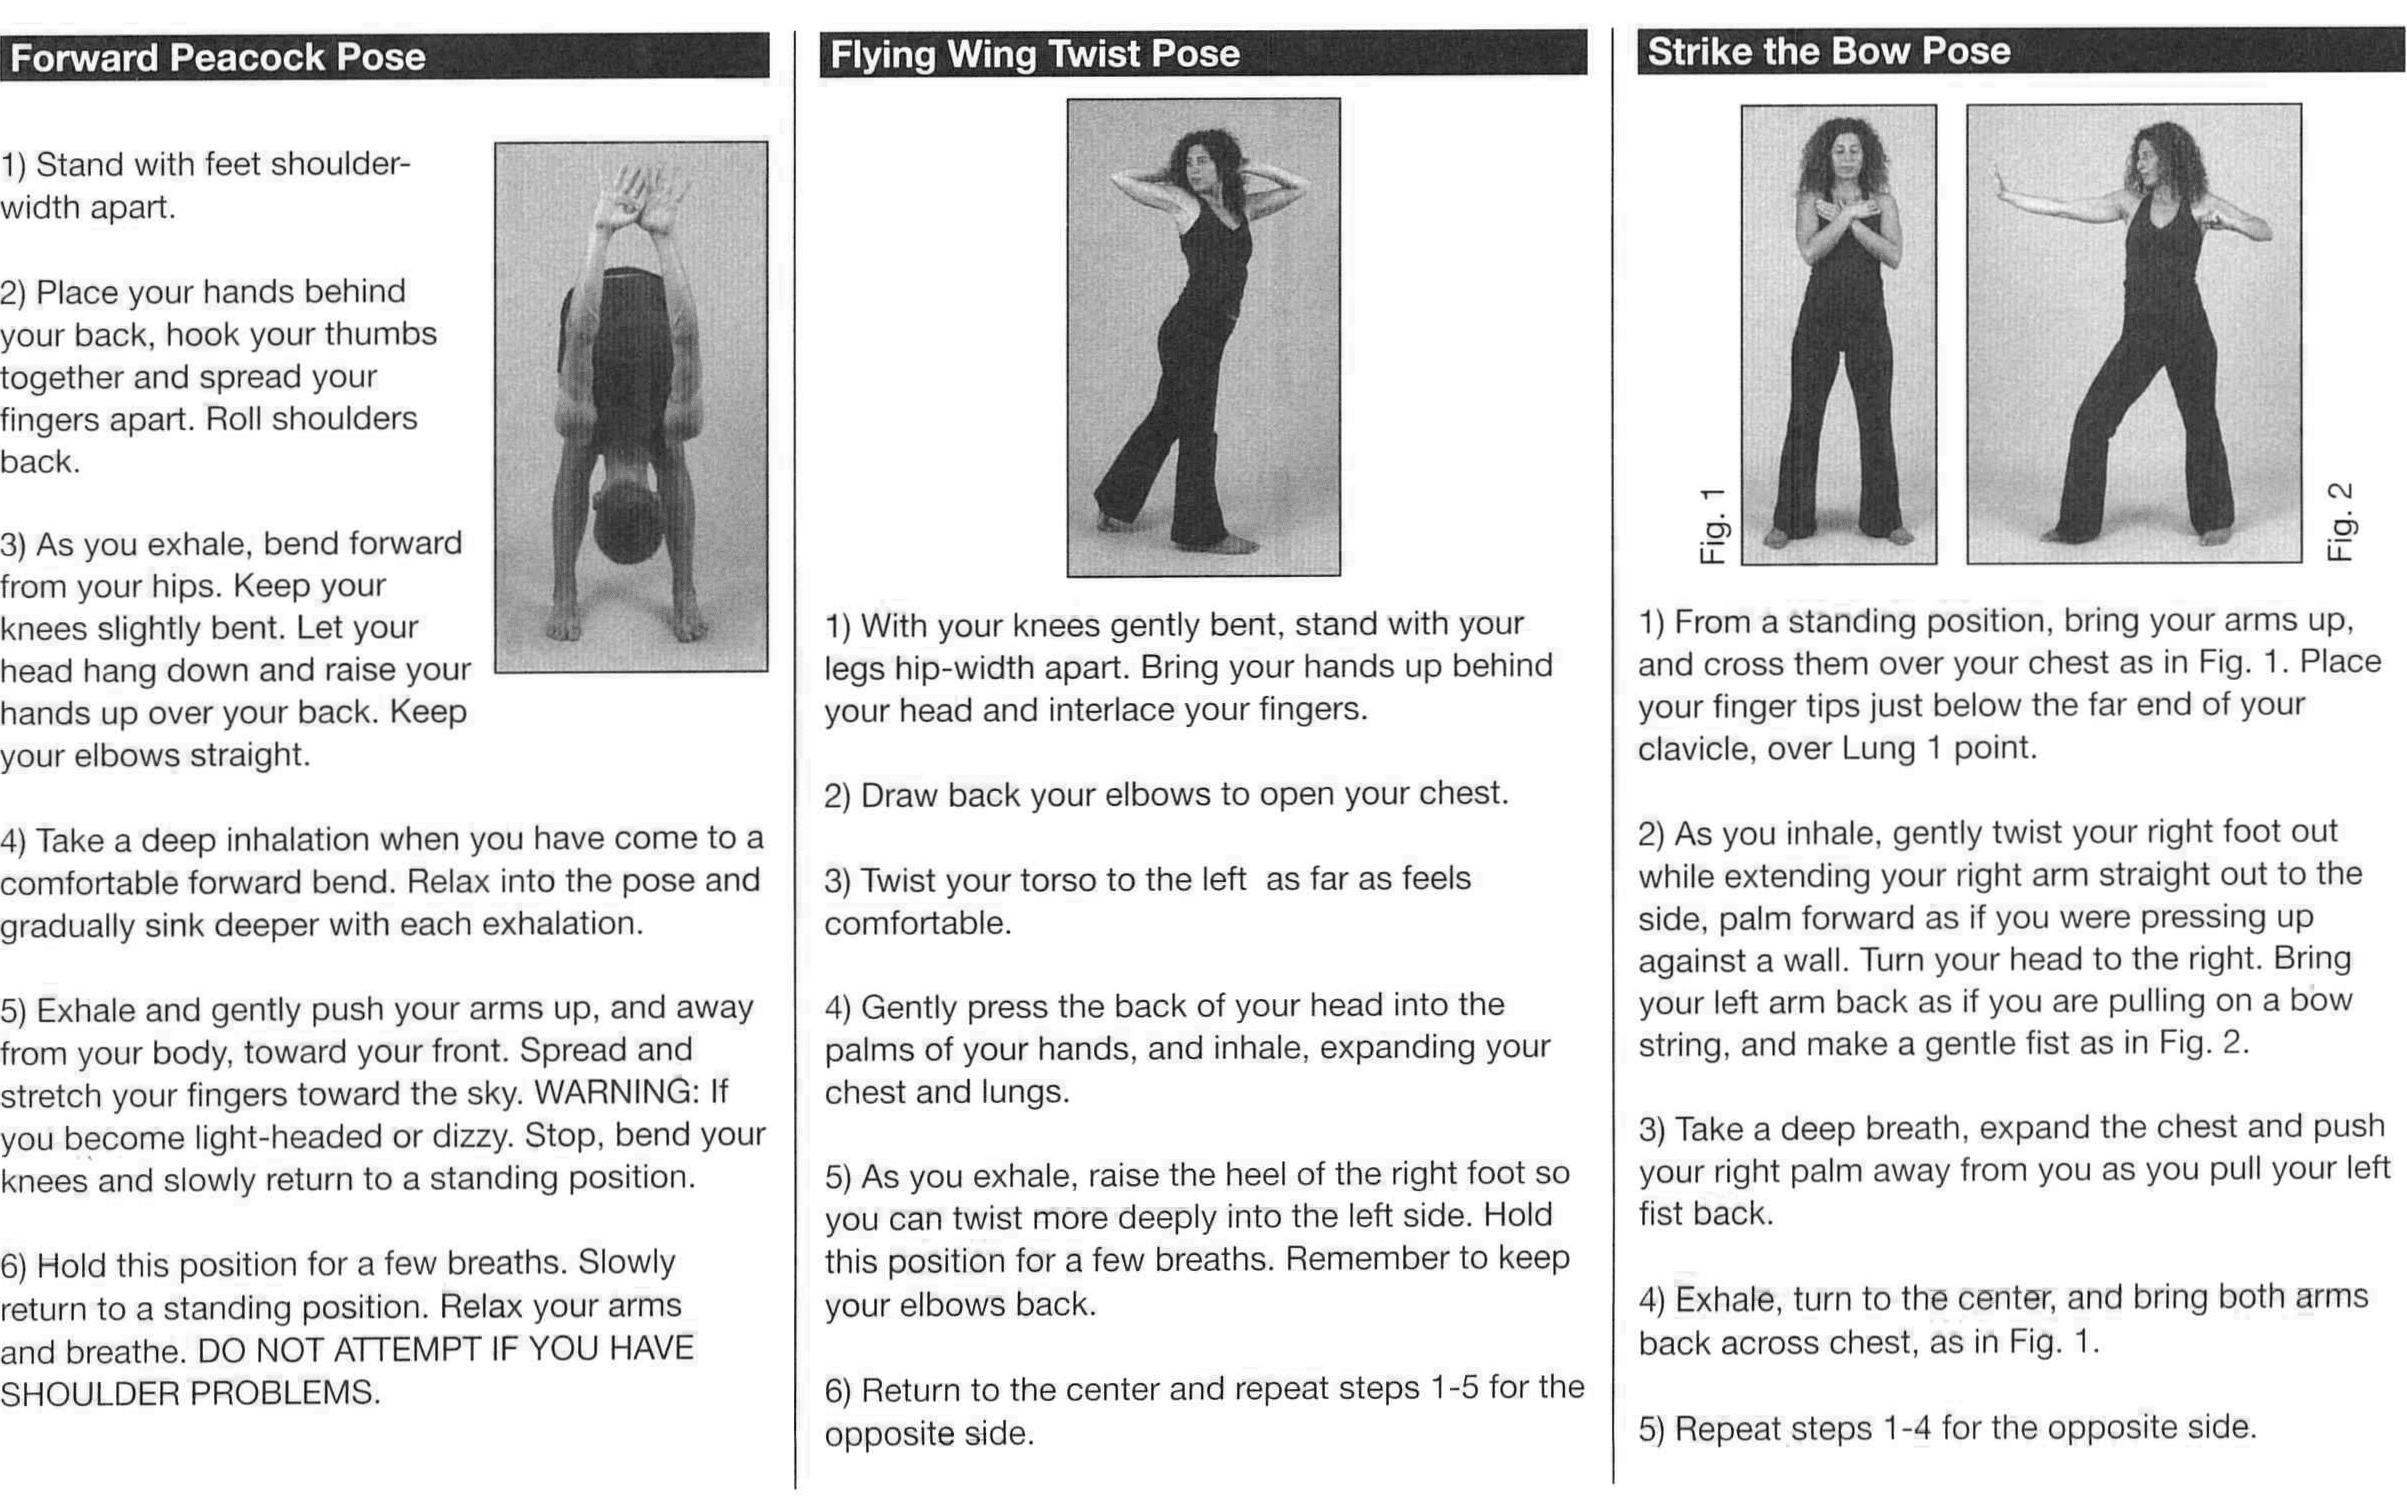 Diagram and instructions for forward peacock pose, flying wing twist pose, and strike the bow pose